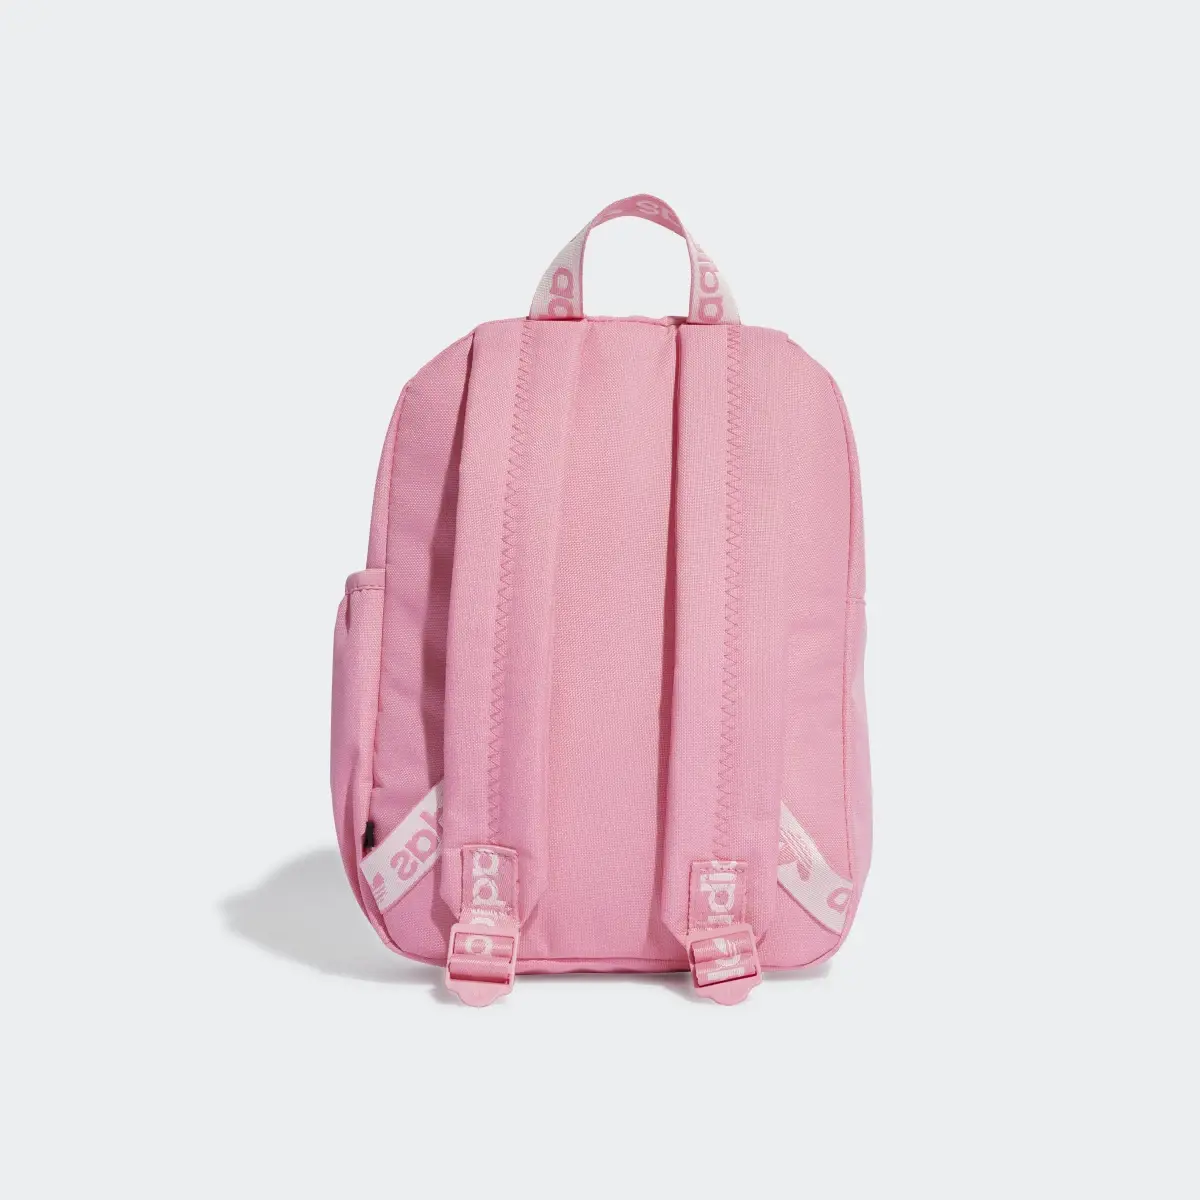 Adidas Adicolor Classic Backpack Small. 3